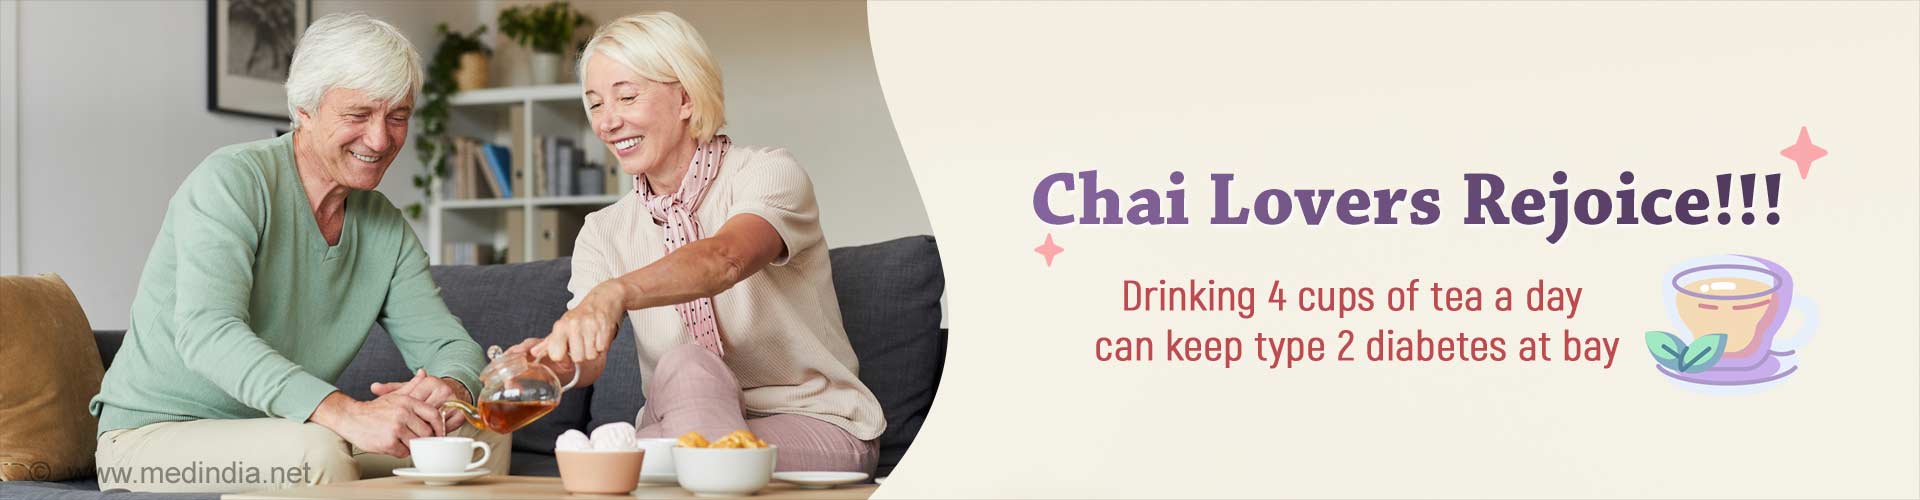 Chai lovers rejoice. Drinking 3 cups of tea a week can make you live longer.